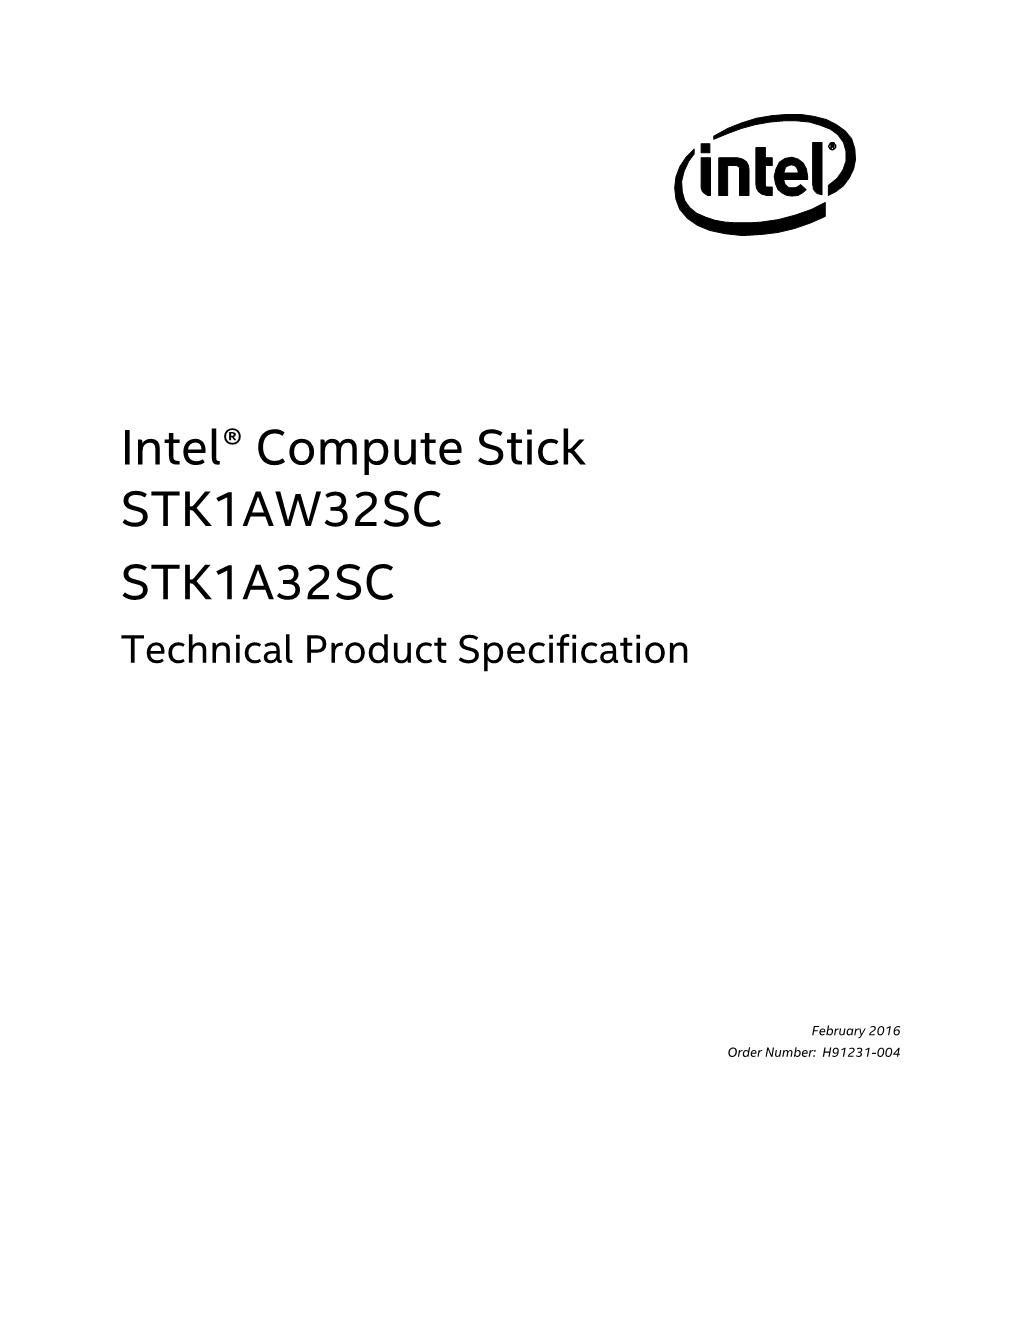 Intel® Compute Stick STK1AW32SC STK1A32SC Technical Product Specification